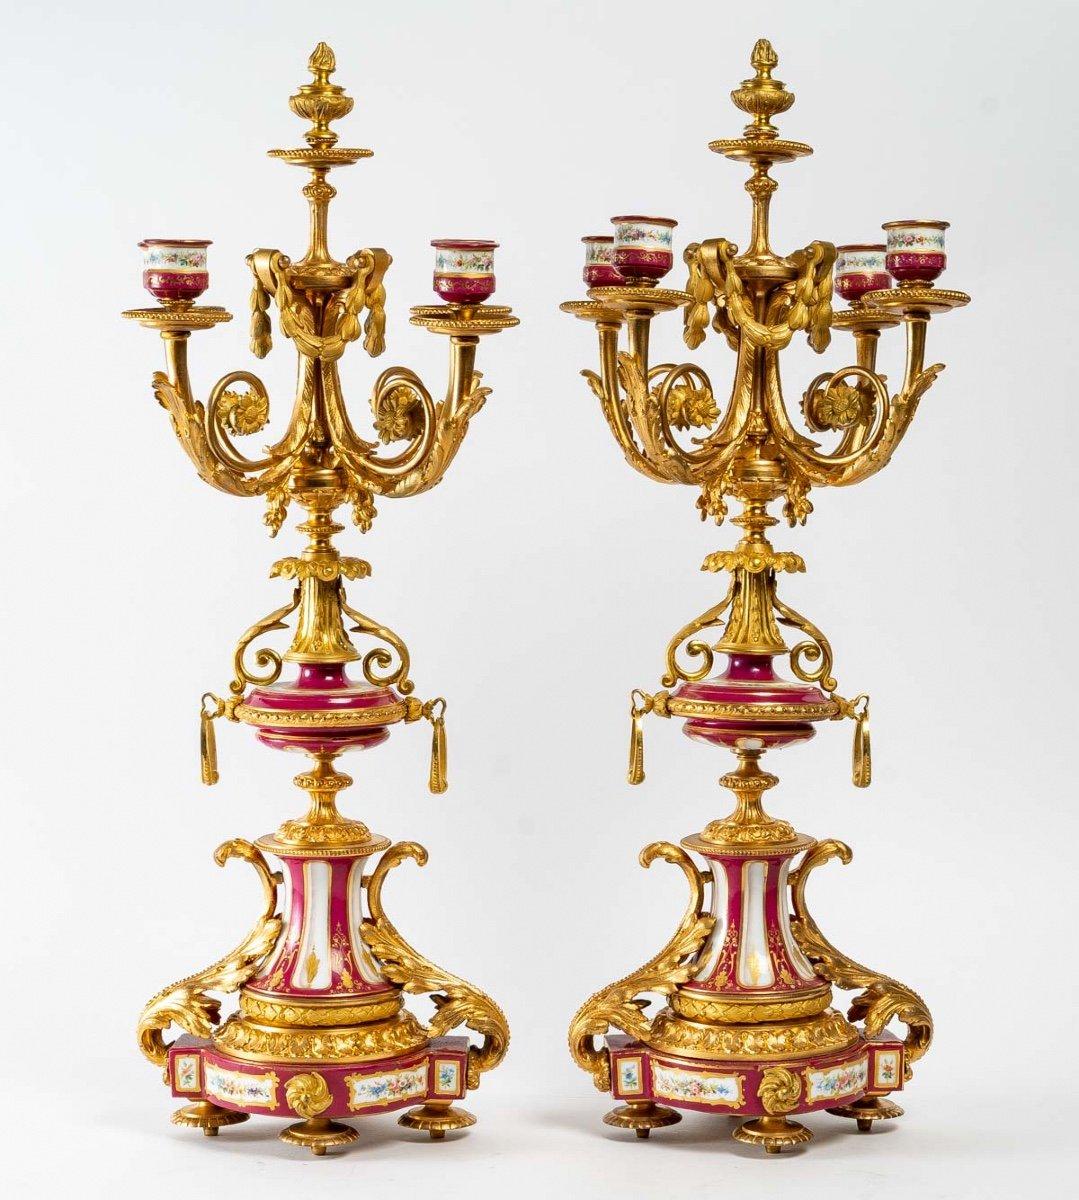 Napoleon III Pair of Candelabras in Gilt Bronze and Sèvres Porcelain End 19th Century